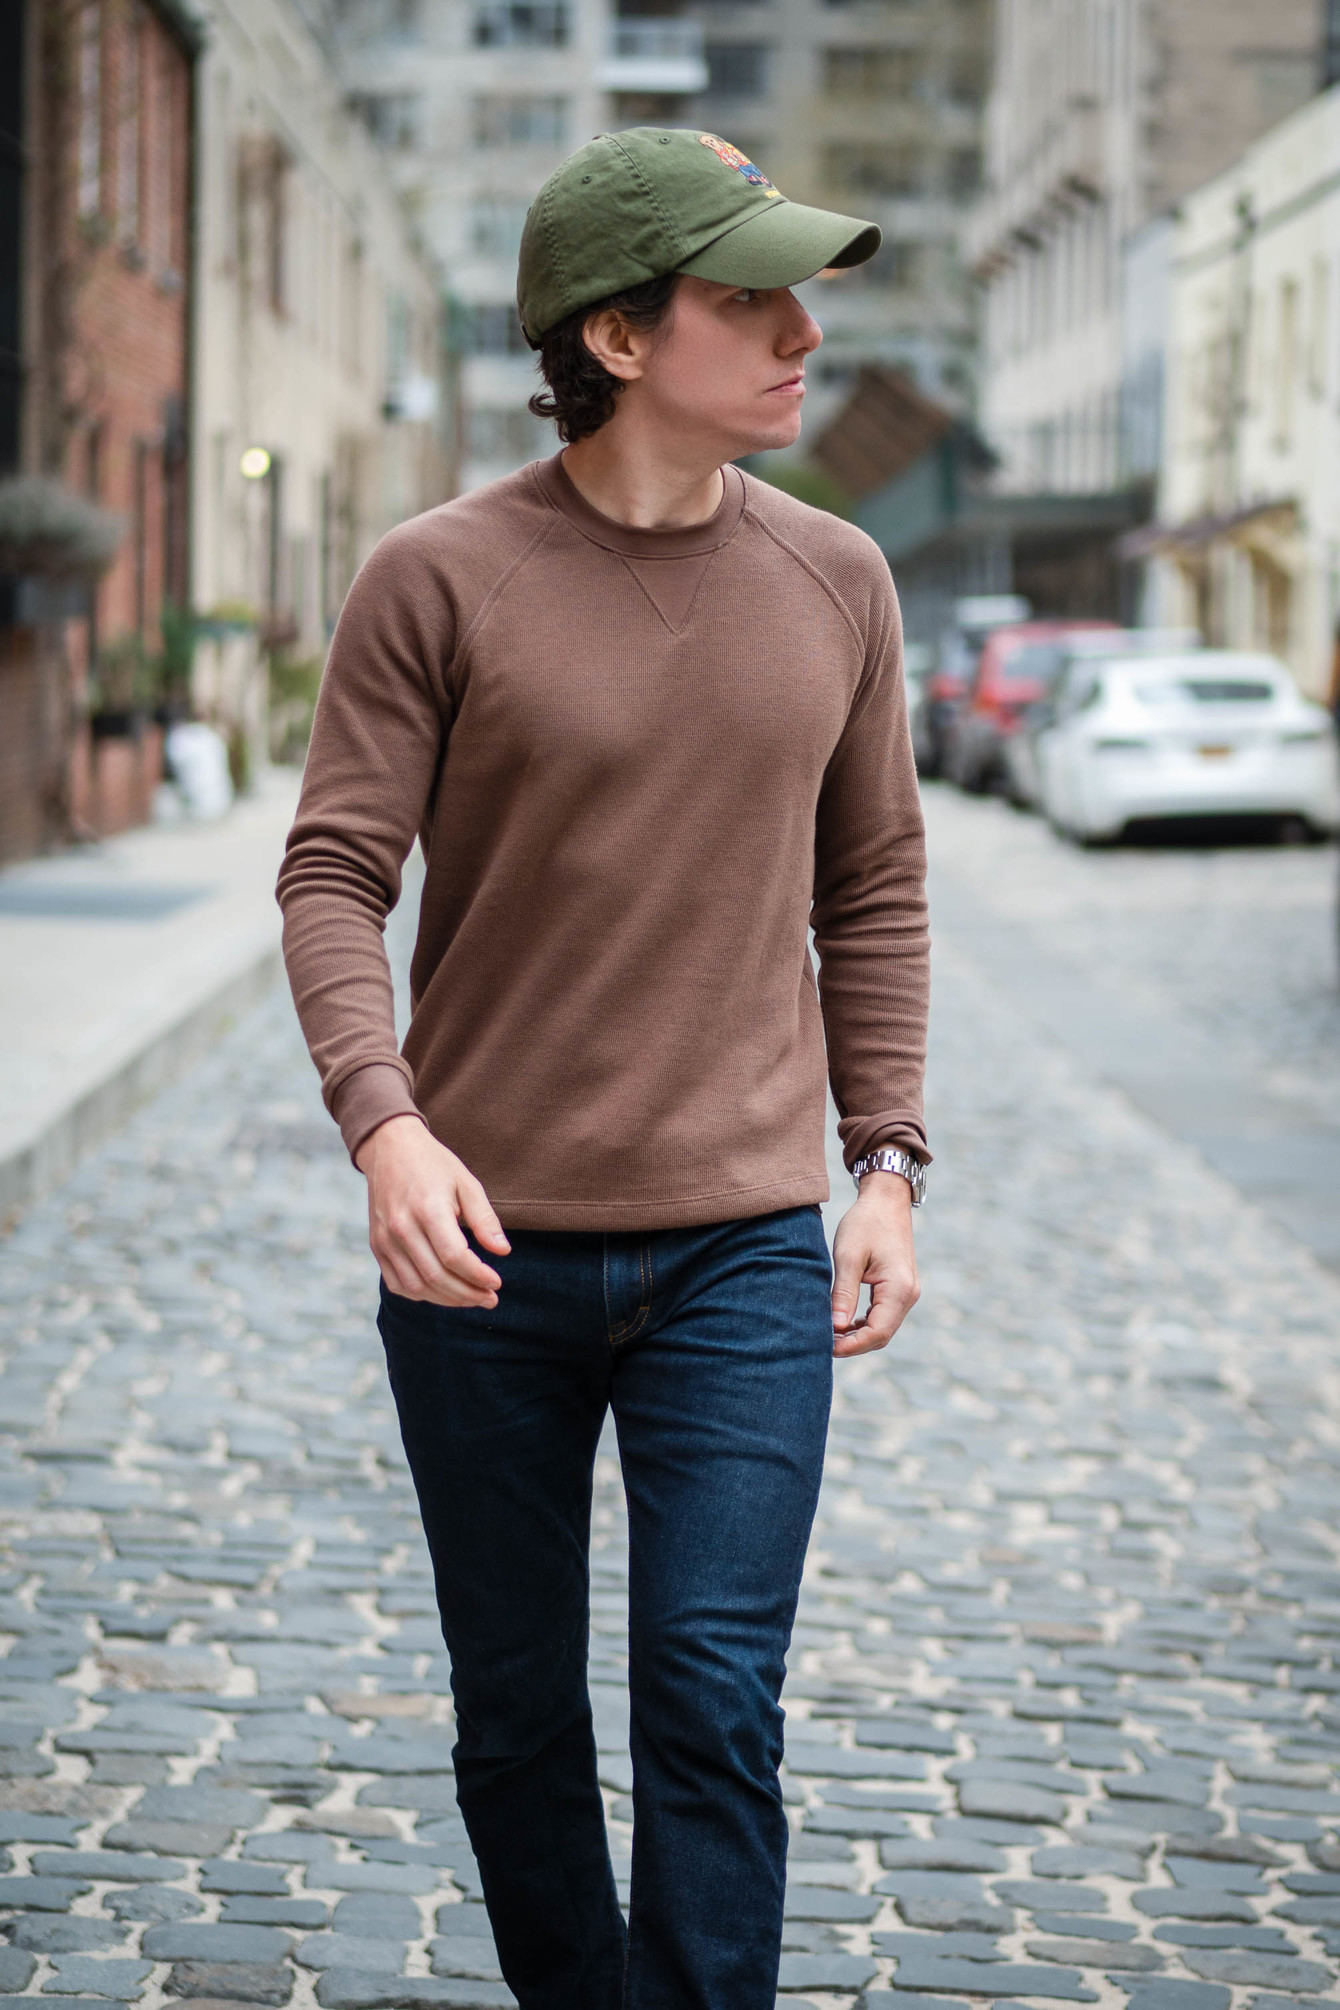 Implement Theseus Dekan Brown Sweater and Blue Jeans - The Modest Man